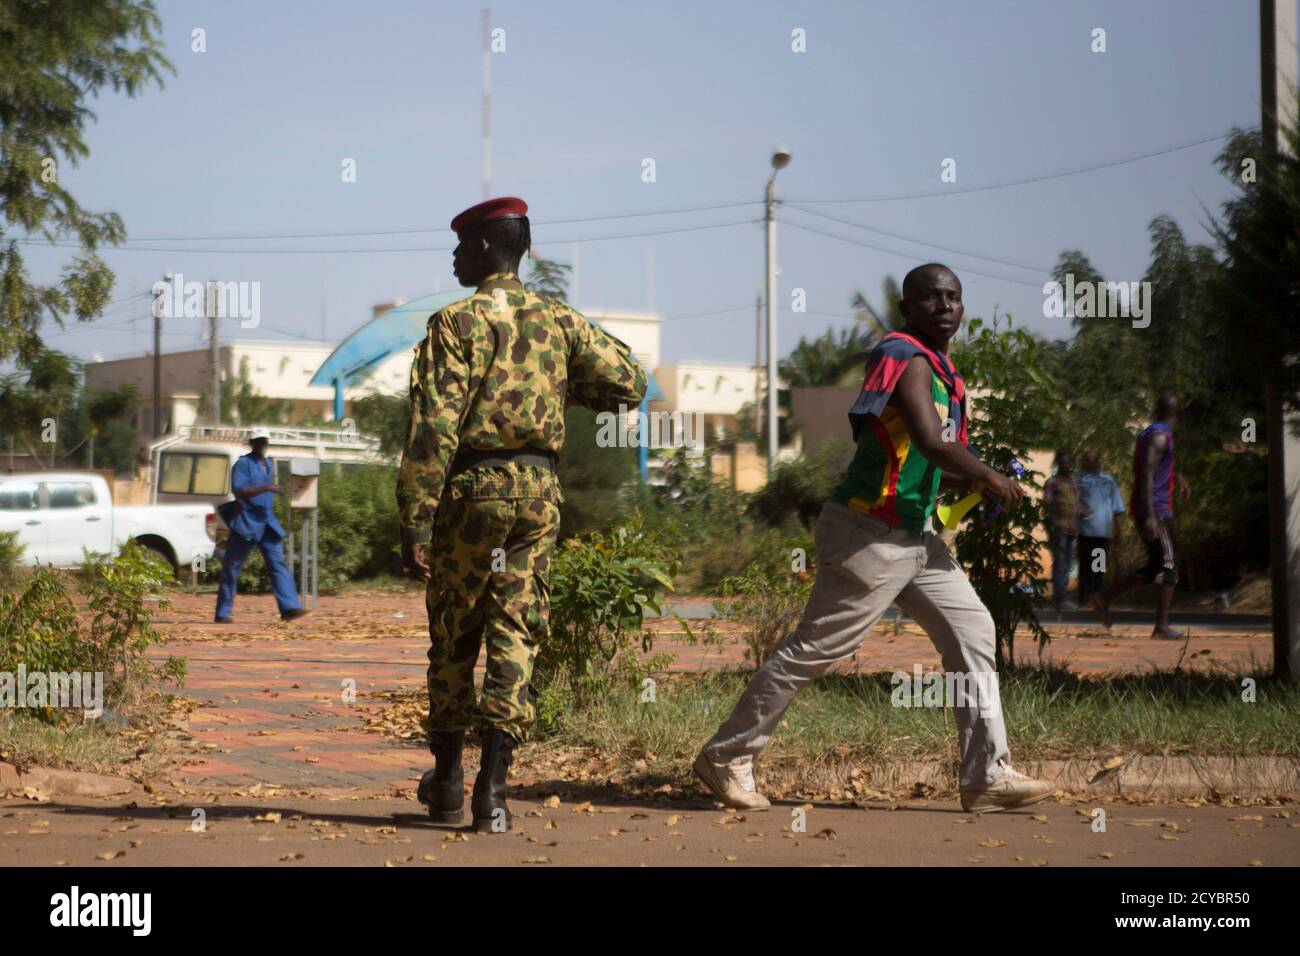 A protester leaves the state TV headquarters in Ouagadougou, capital of Burkina Faso, November 2, 2014. Gunfire rang out on Sunday at the headquarters of Burkina Faso's state-run RTB Television as the broadcaster went off air, a Reuters witness said, amid a power struggle following the resignation of long-ruling President Blaise Compaore. The gunshots were fired into the air and there was no immediate sign of injuries.  REUTERS/Joe Penney (BURKINA FASO - Tags: CIVIL UNREST POLITICS MILITARY) Stock Photo